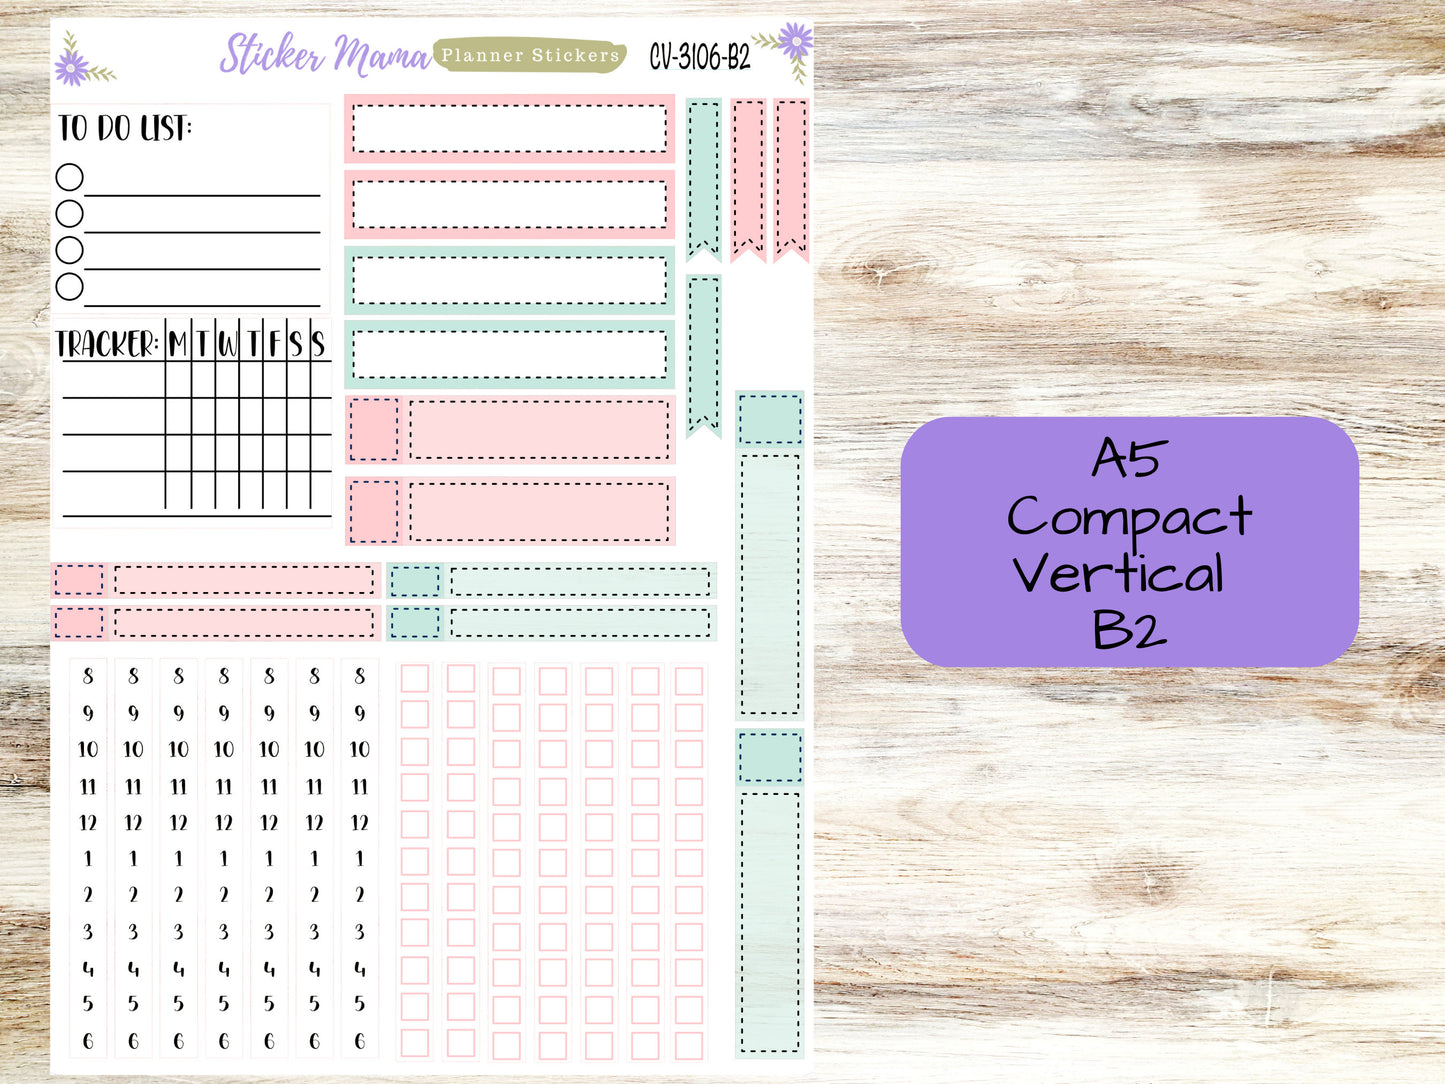 A5 COMPACT VERTICAL-Kit #3106 || Hello, Plaid!  - Compact Vertical - Planner Stickers - Erin Condren Compact Vertical Weekly Kit